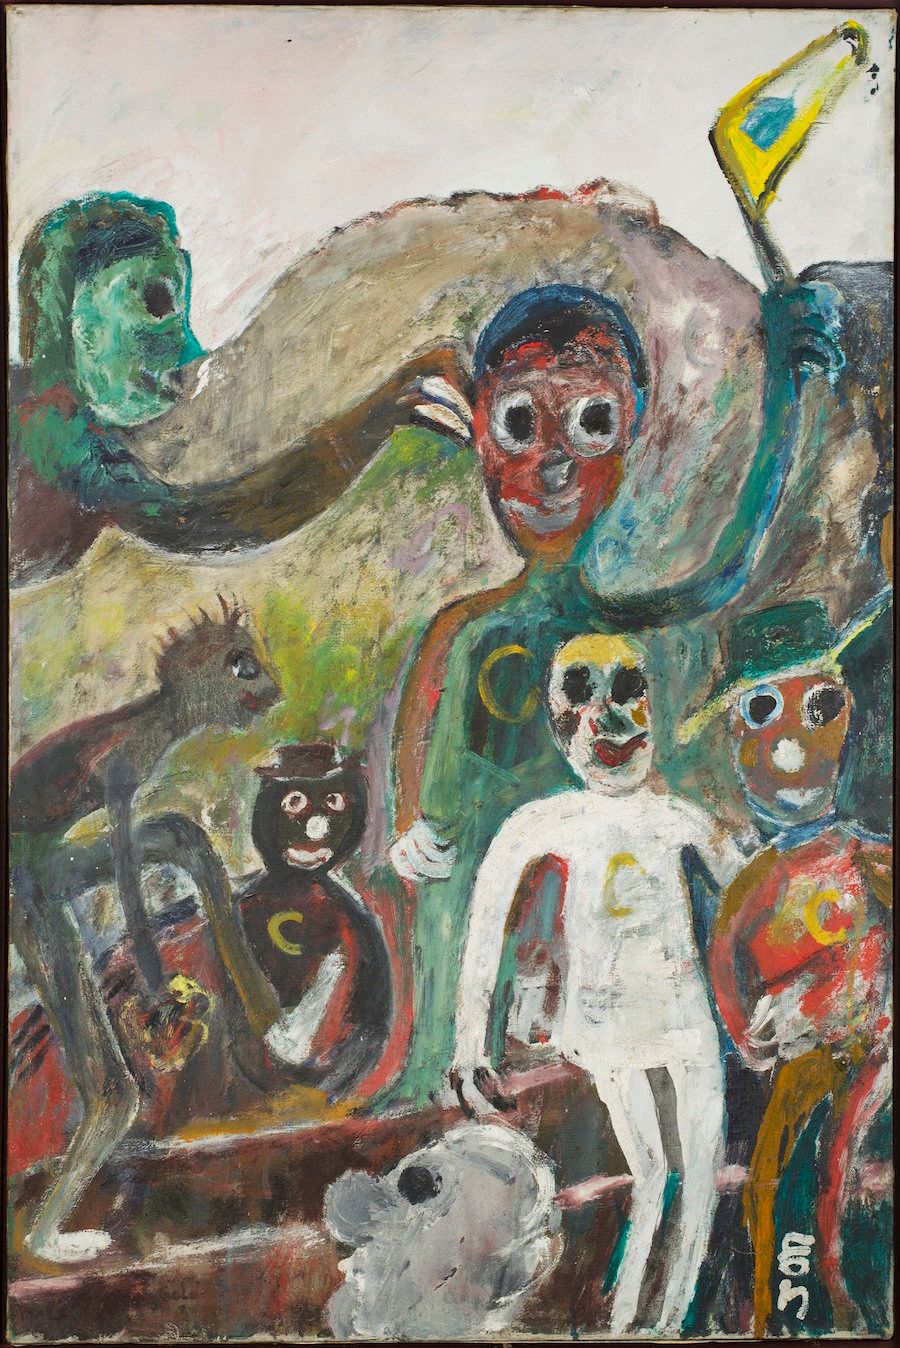 Behind The Game, 1988 Oil on canvas